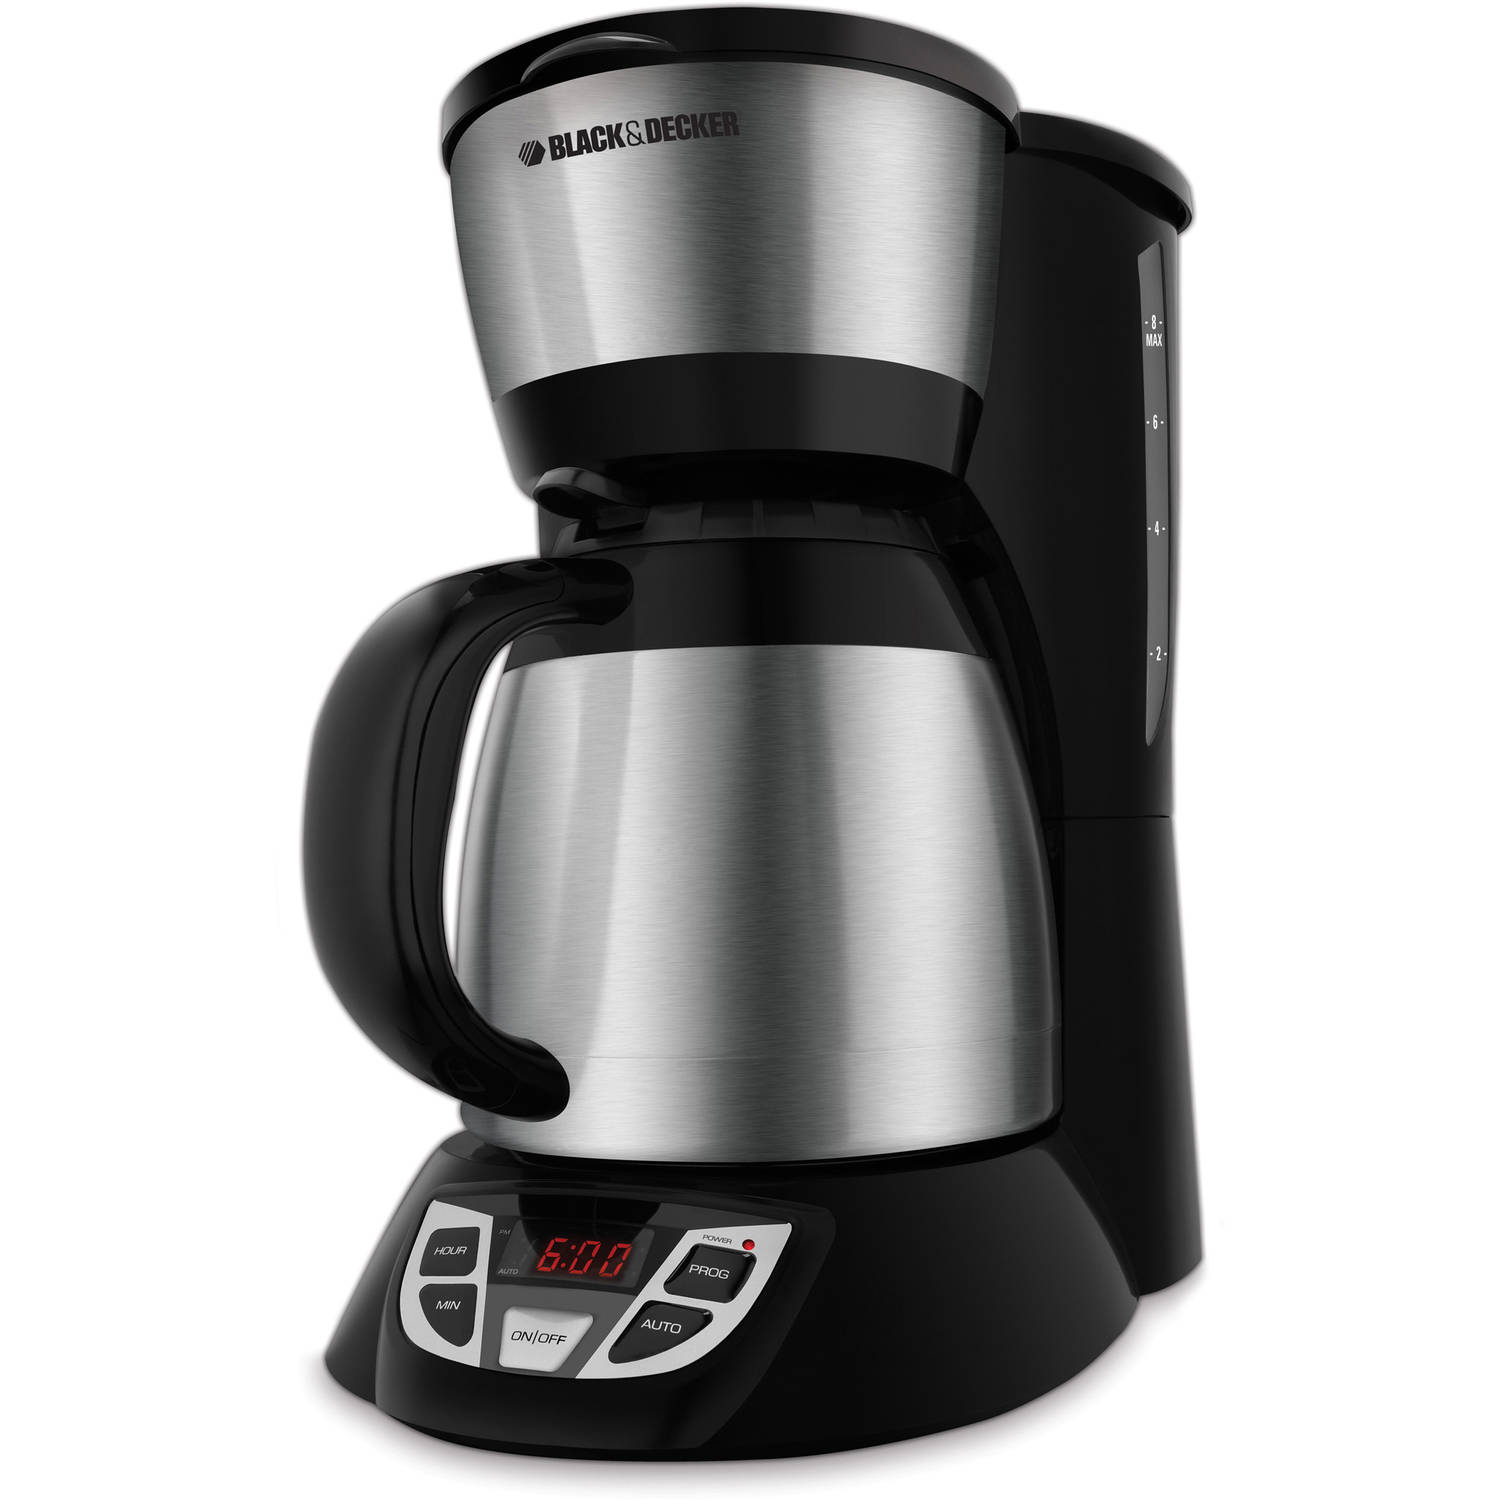 BLACK+DECKER 8-Cup Thermal Programmable Coffee Maker, Stainless Steel and Black, CM1609 - image 1 of 6